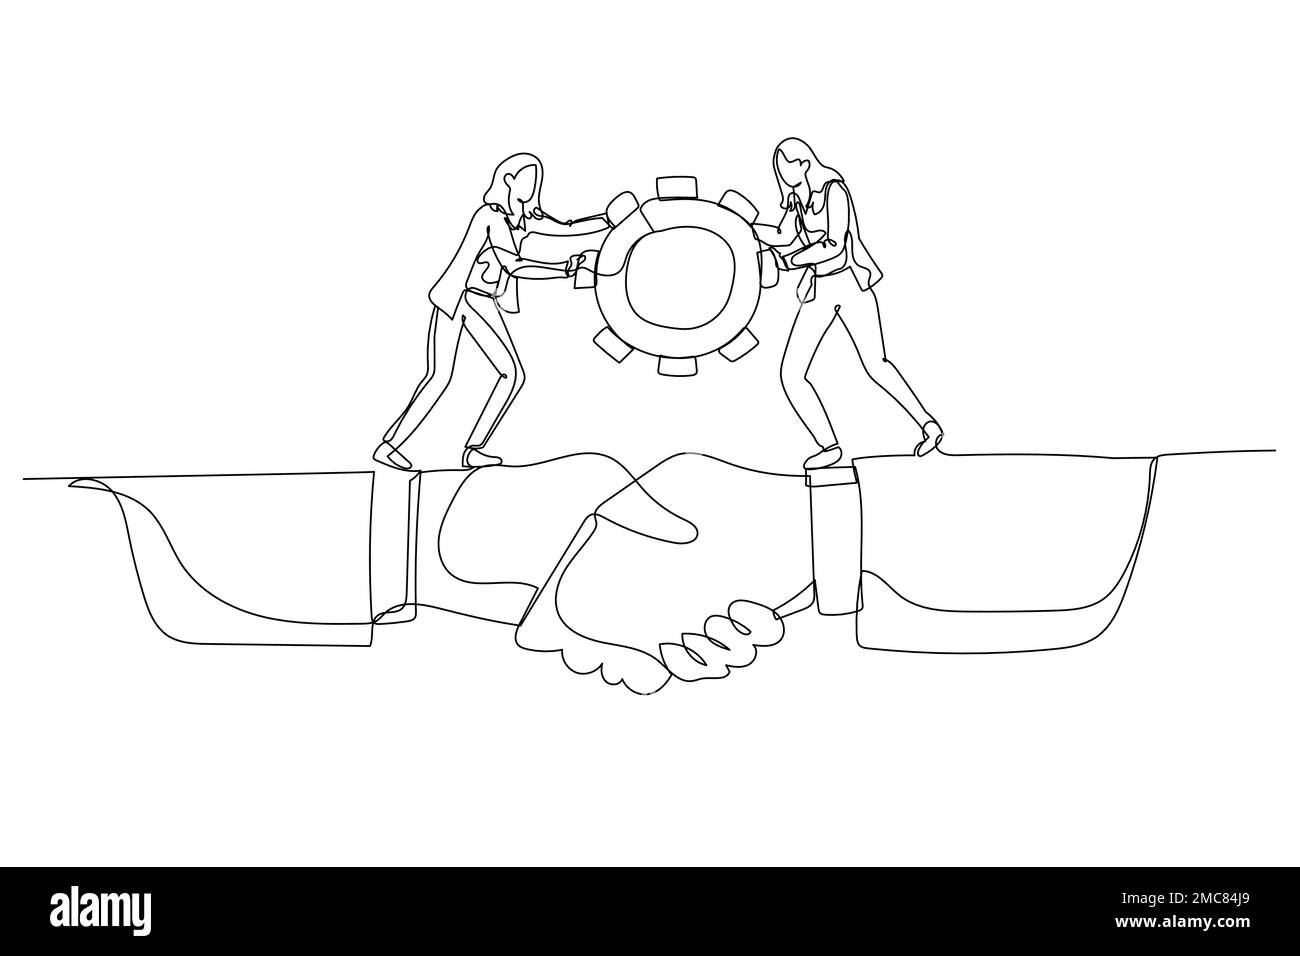 Cartoon of businesswoman team bring gear cogwheel across bridge made from shaking hand. Single continuous line art style Stock Vector